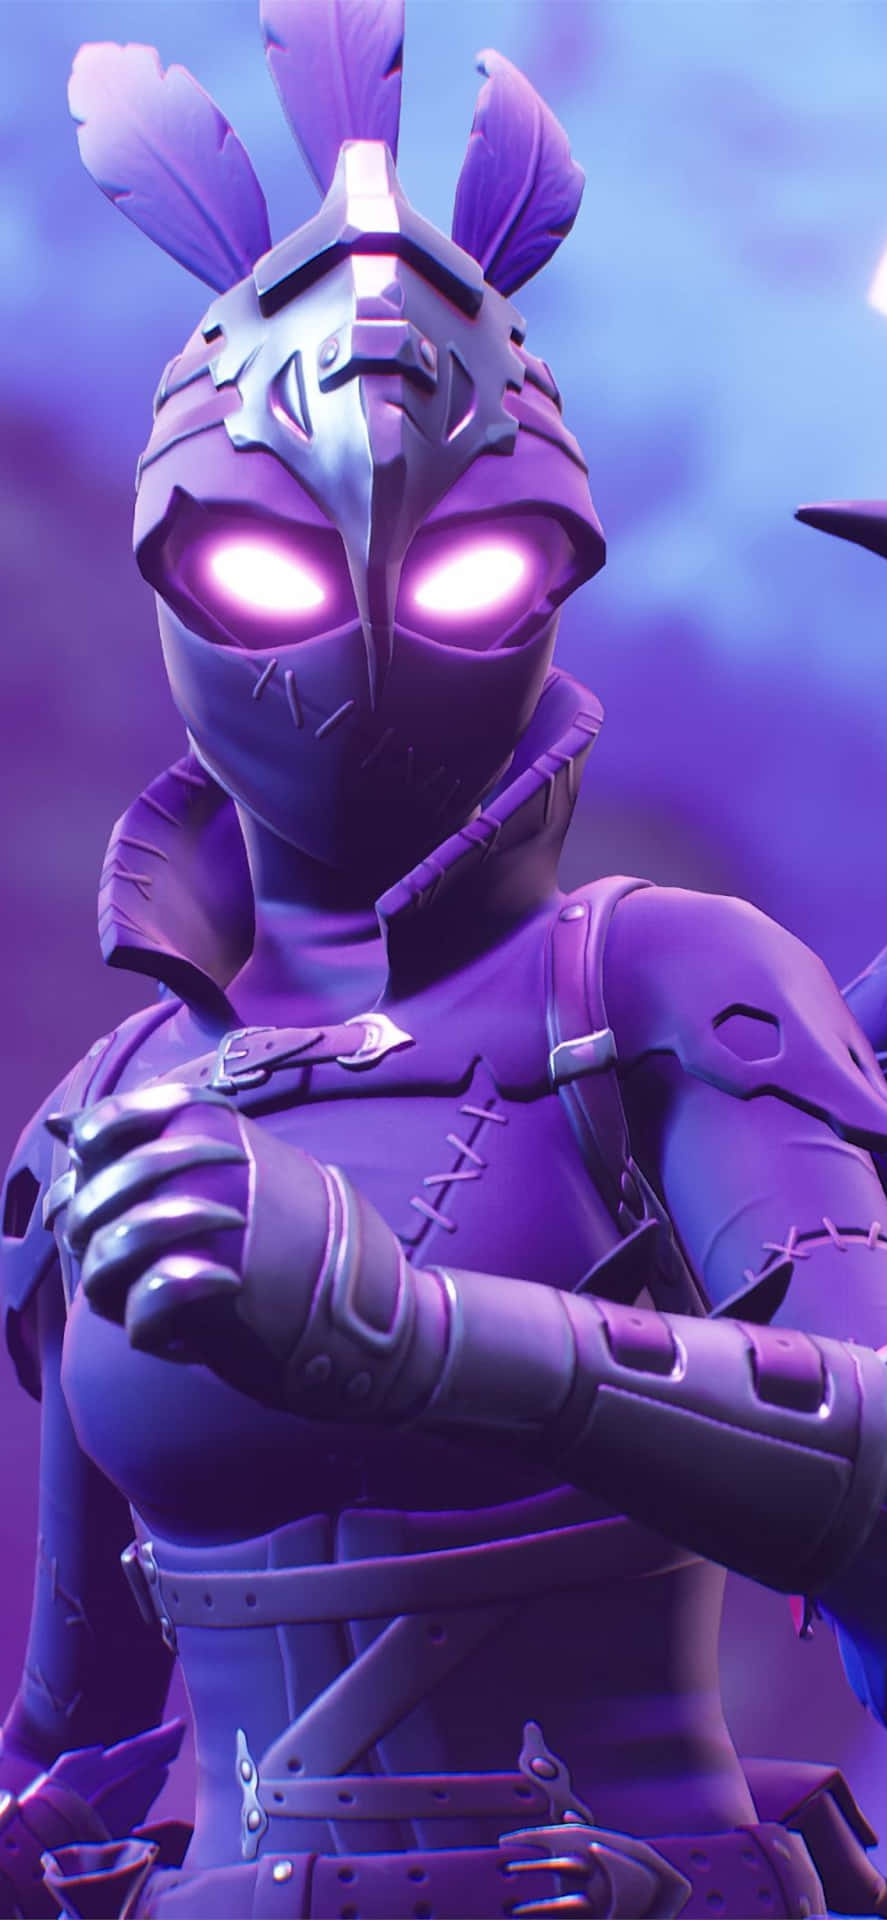 Join the battle with the Raven Fortnite Skin Wallpaper